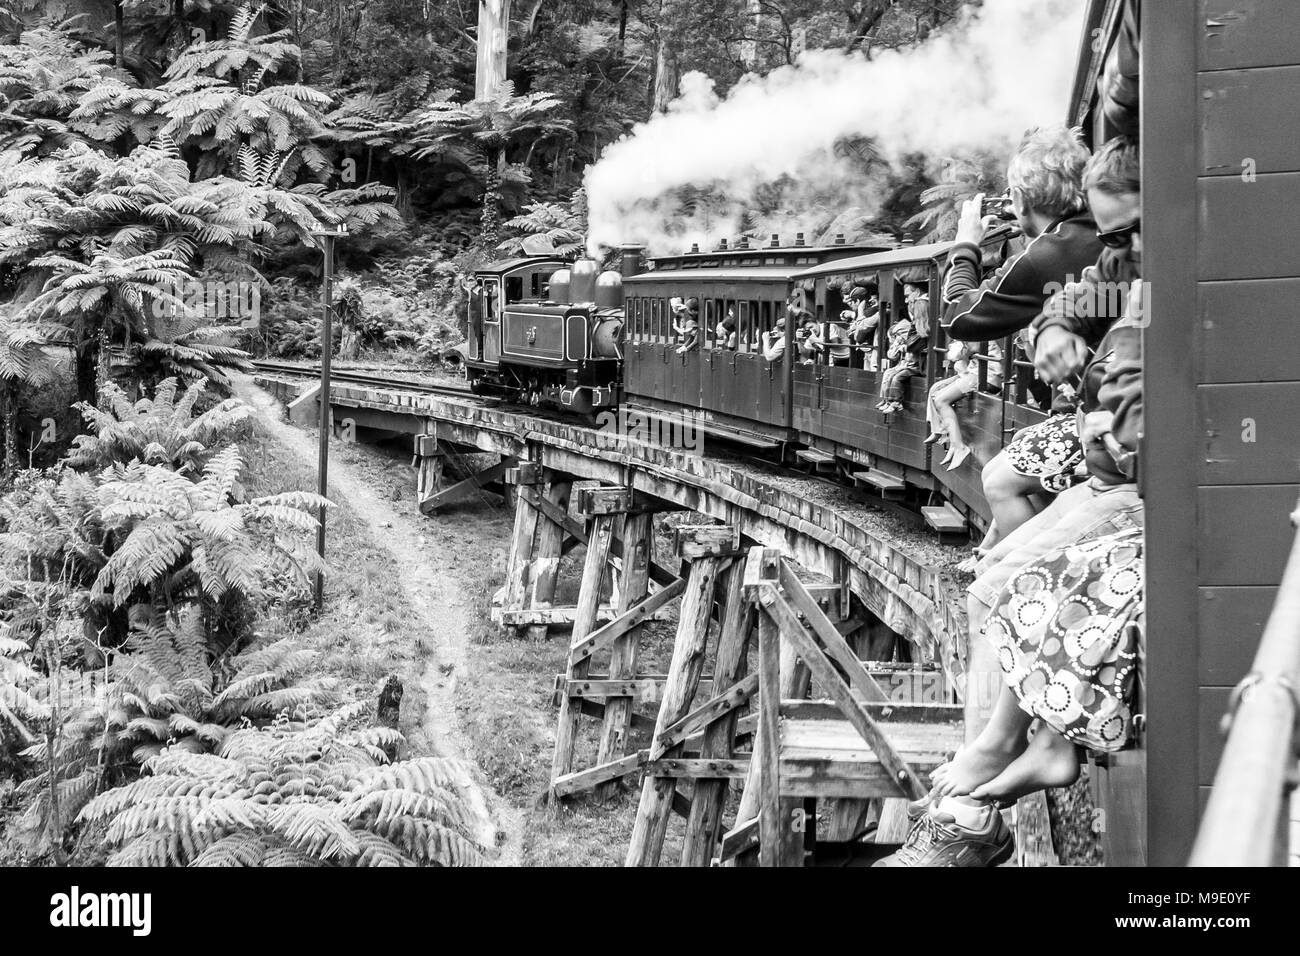 Melbourne, Australia. Puffing Billy steam train with passengers. Historical narrow railway in the Dandenong Ranges near Melbourne. Stock Photo